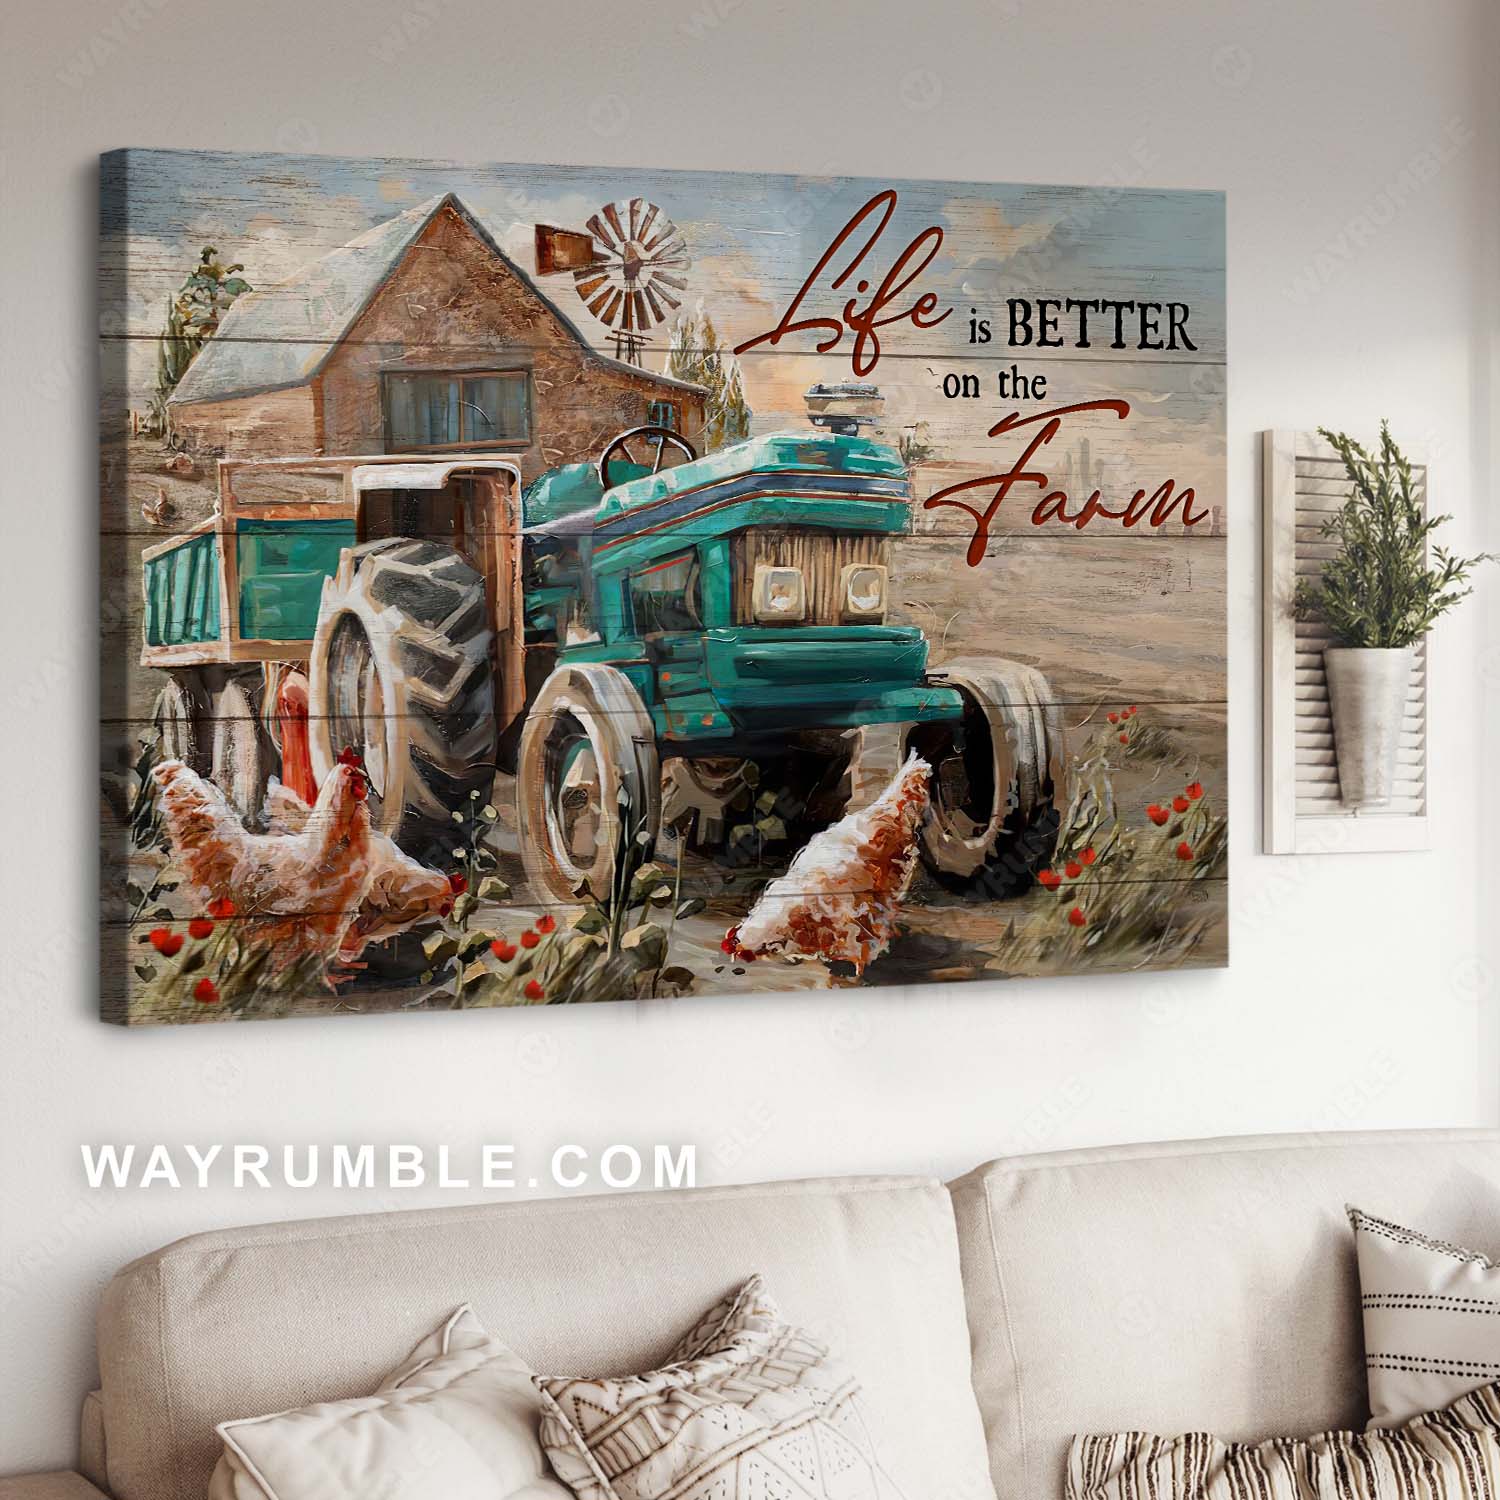 Chicken drawing, Rustic farmhouse, Green farm truck, Life is better on the farm - Jesus Landscape Canvas Prints, Home Decor Wall Art